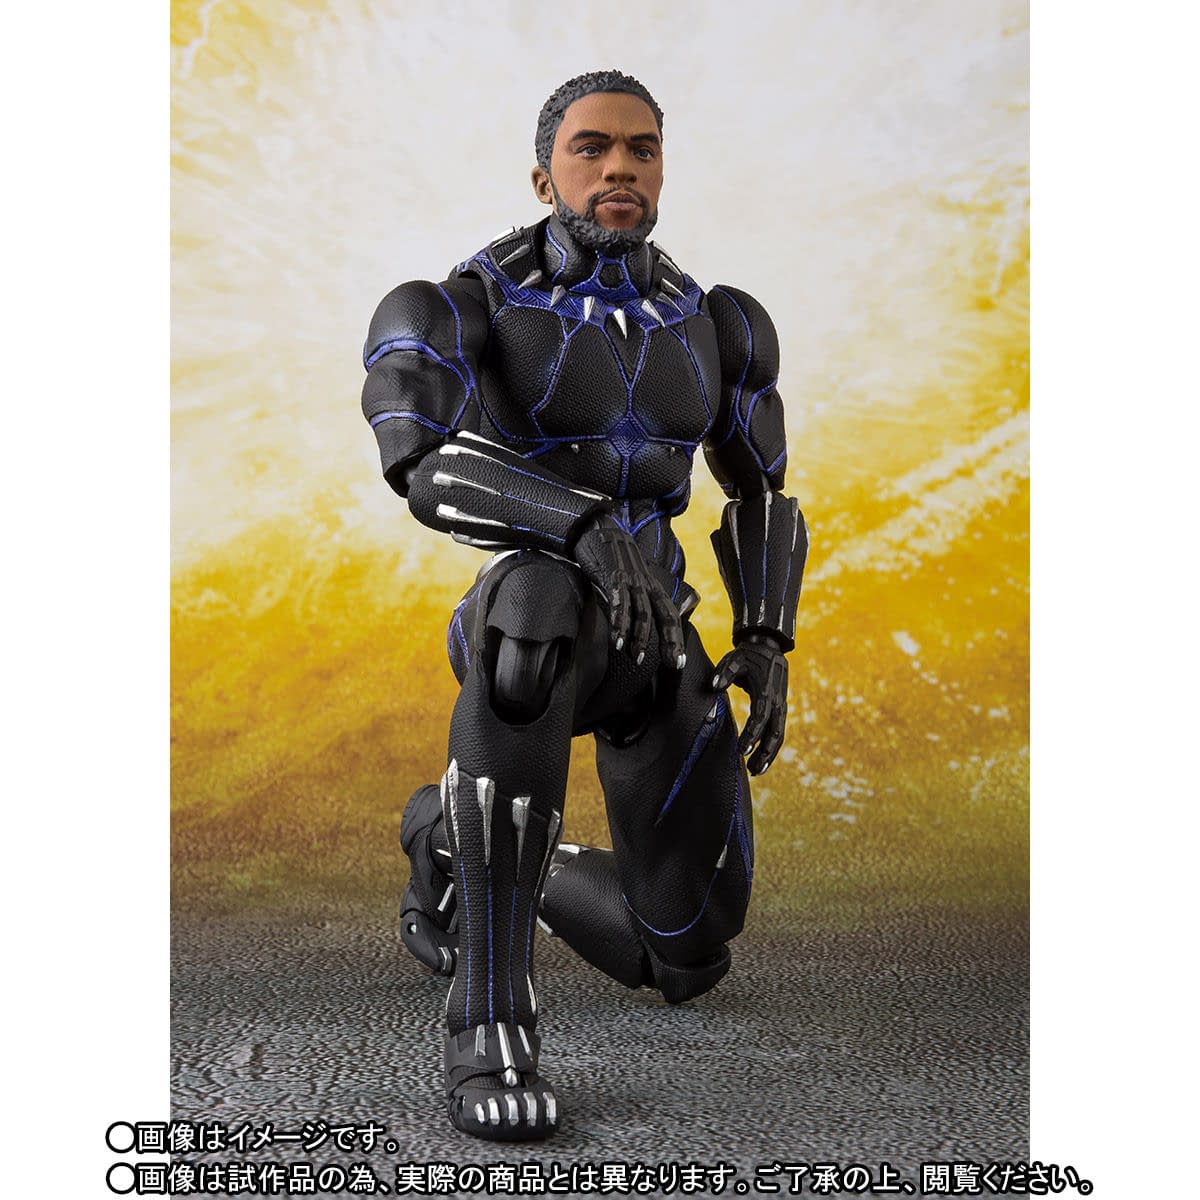 Black Panther Is King in Recently Announced S.H. Figuarts Figures